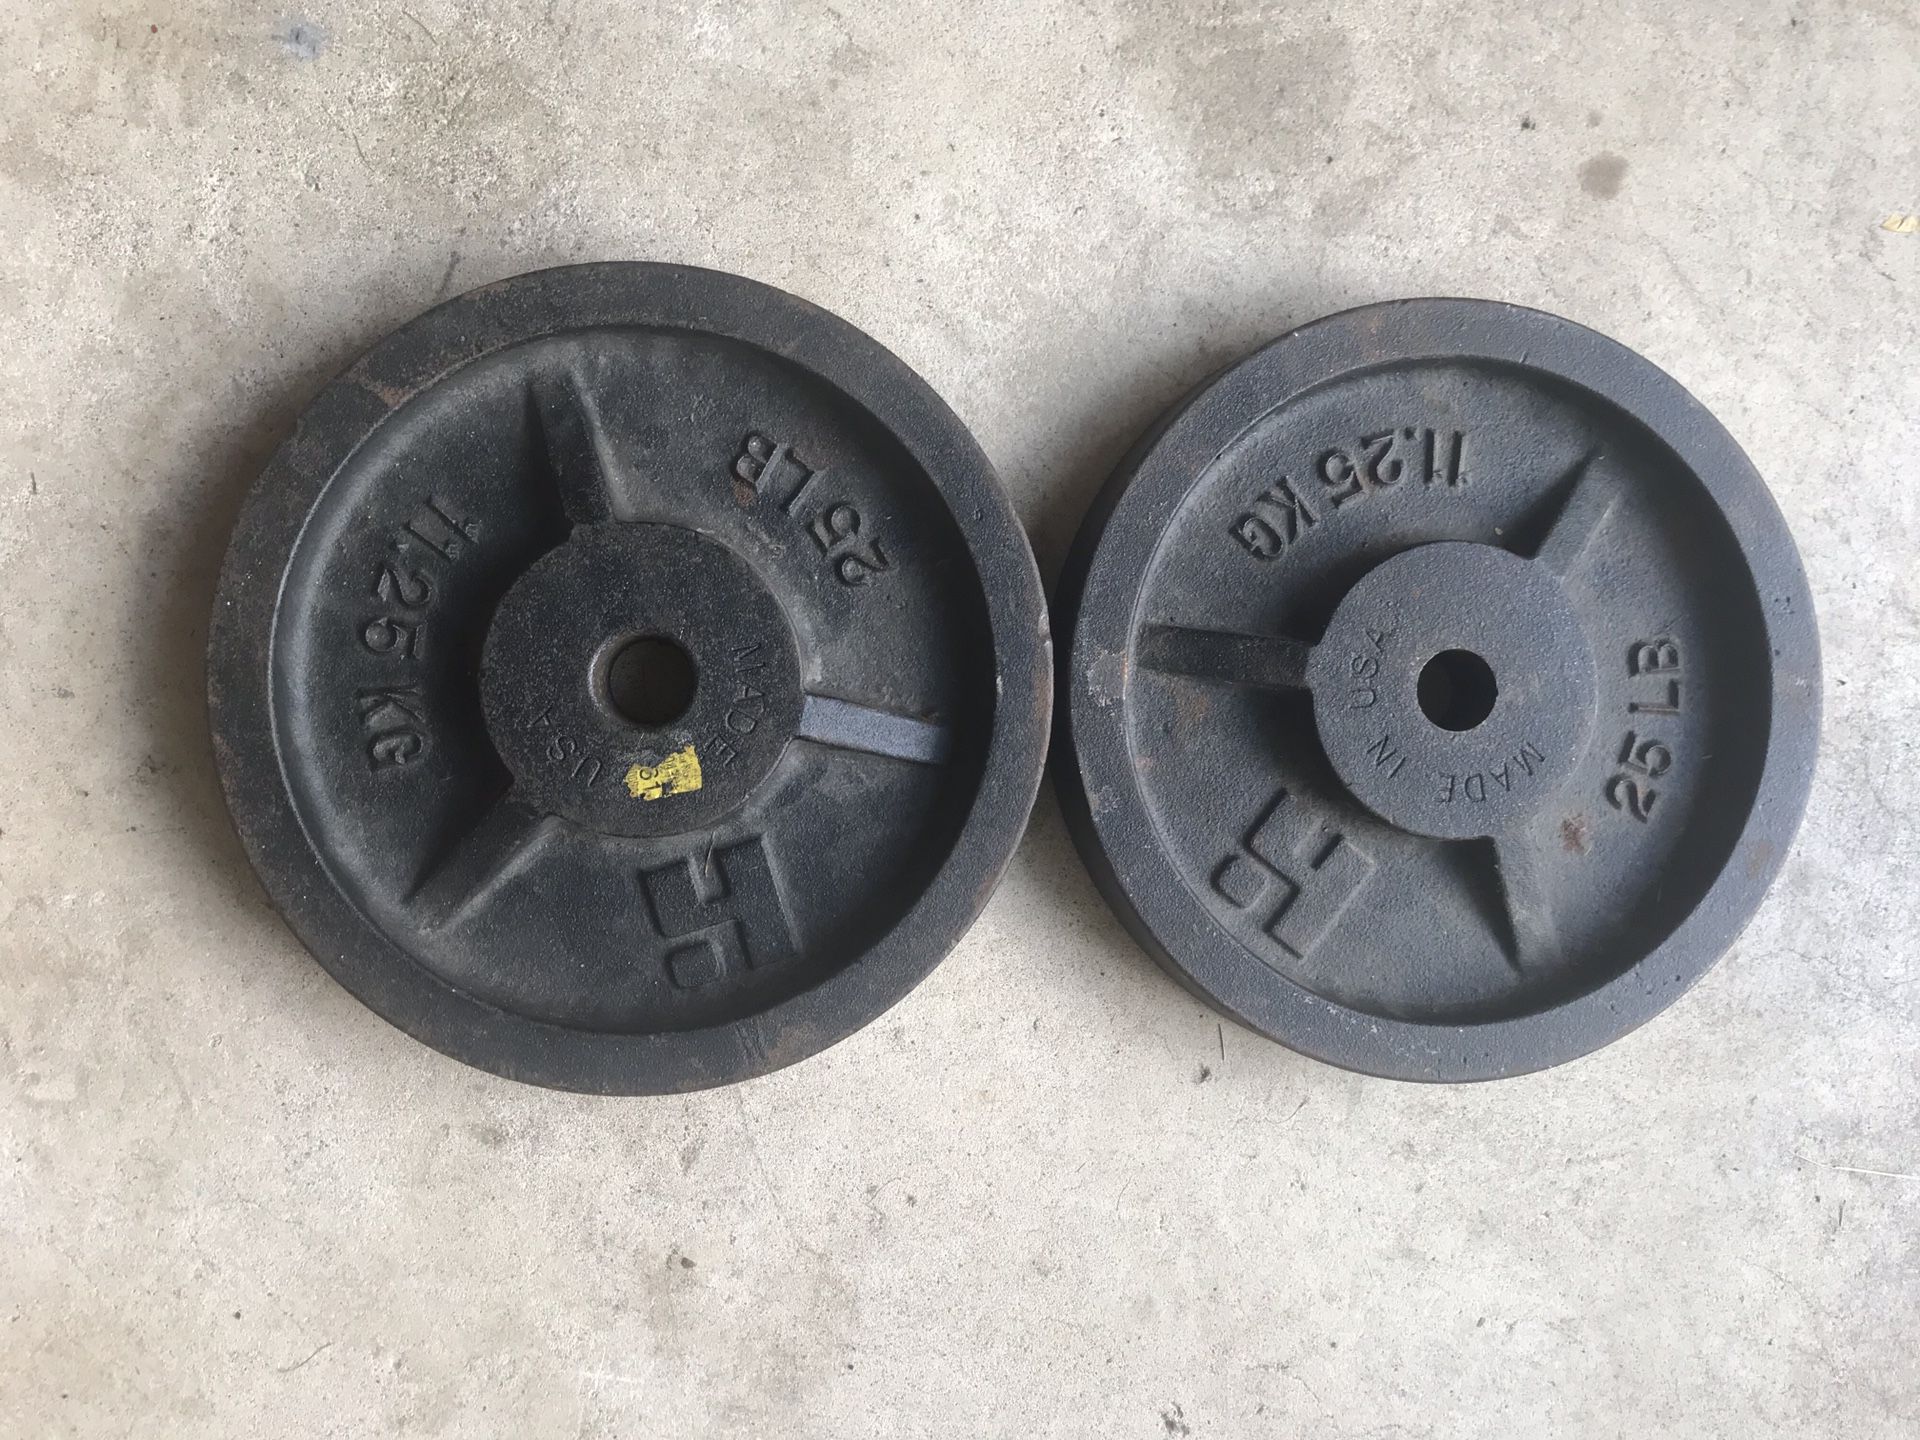 Pair of plates weights 25 Lbs one inch